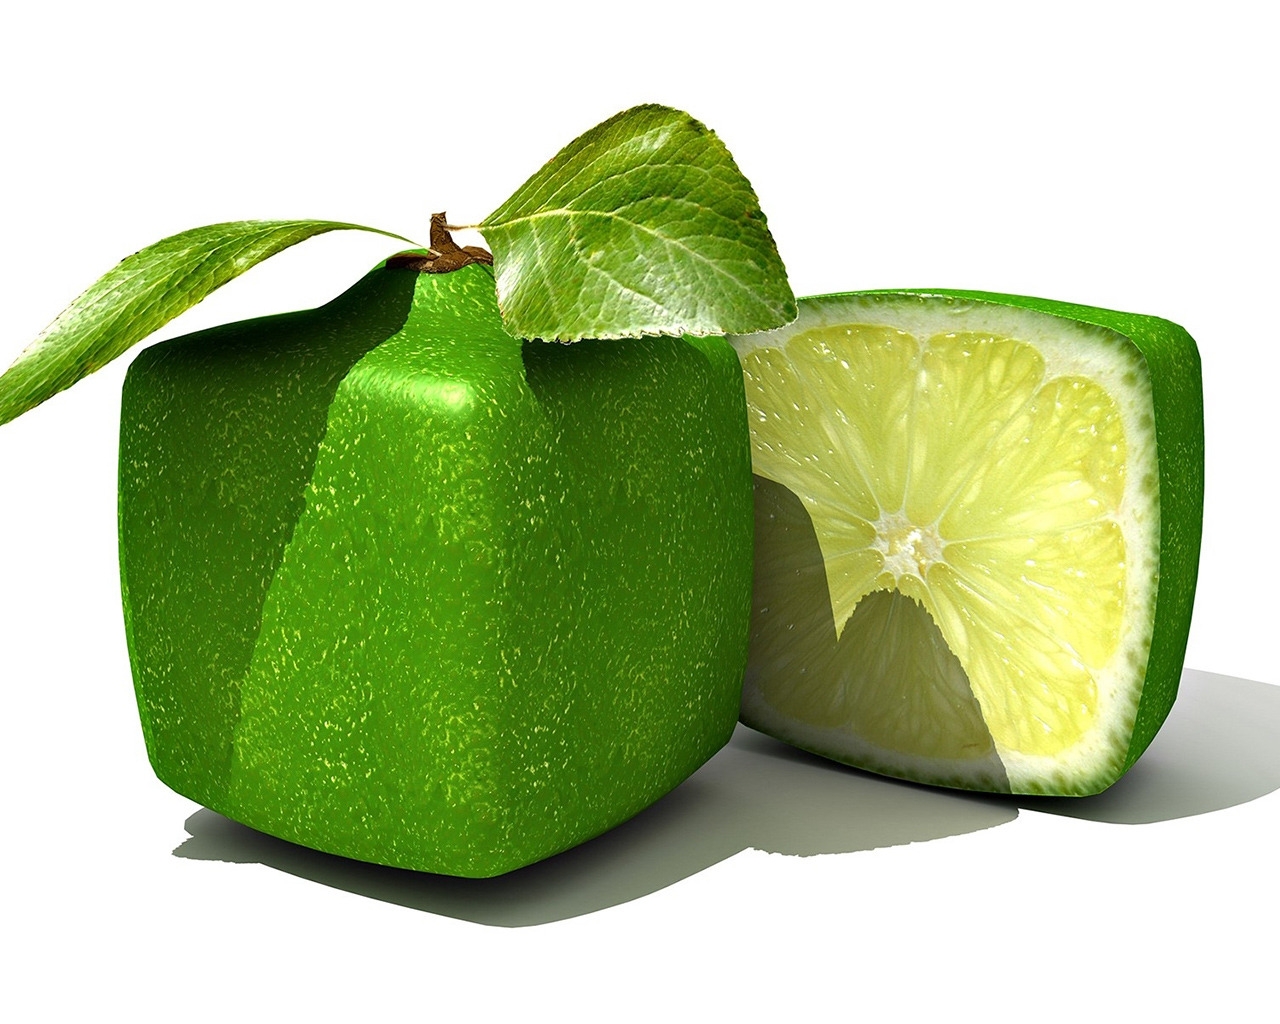 Square Limes for 1280 x 1024 resolution